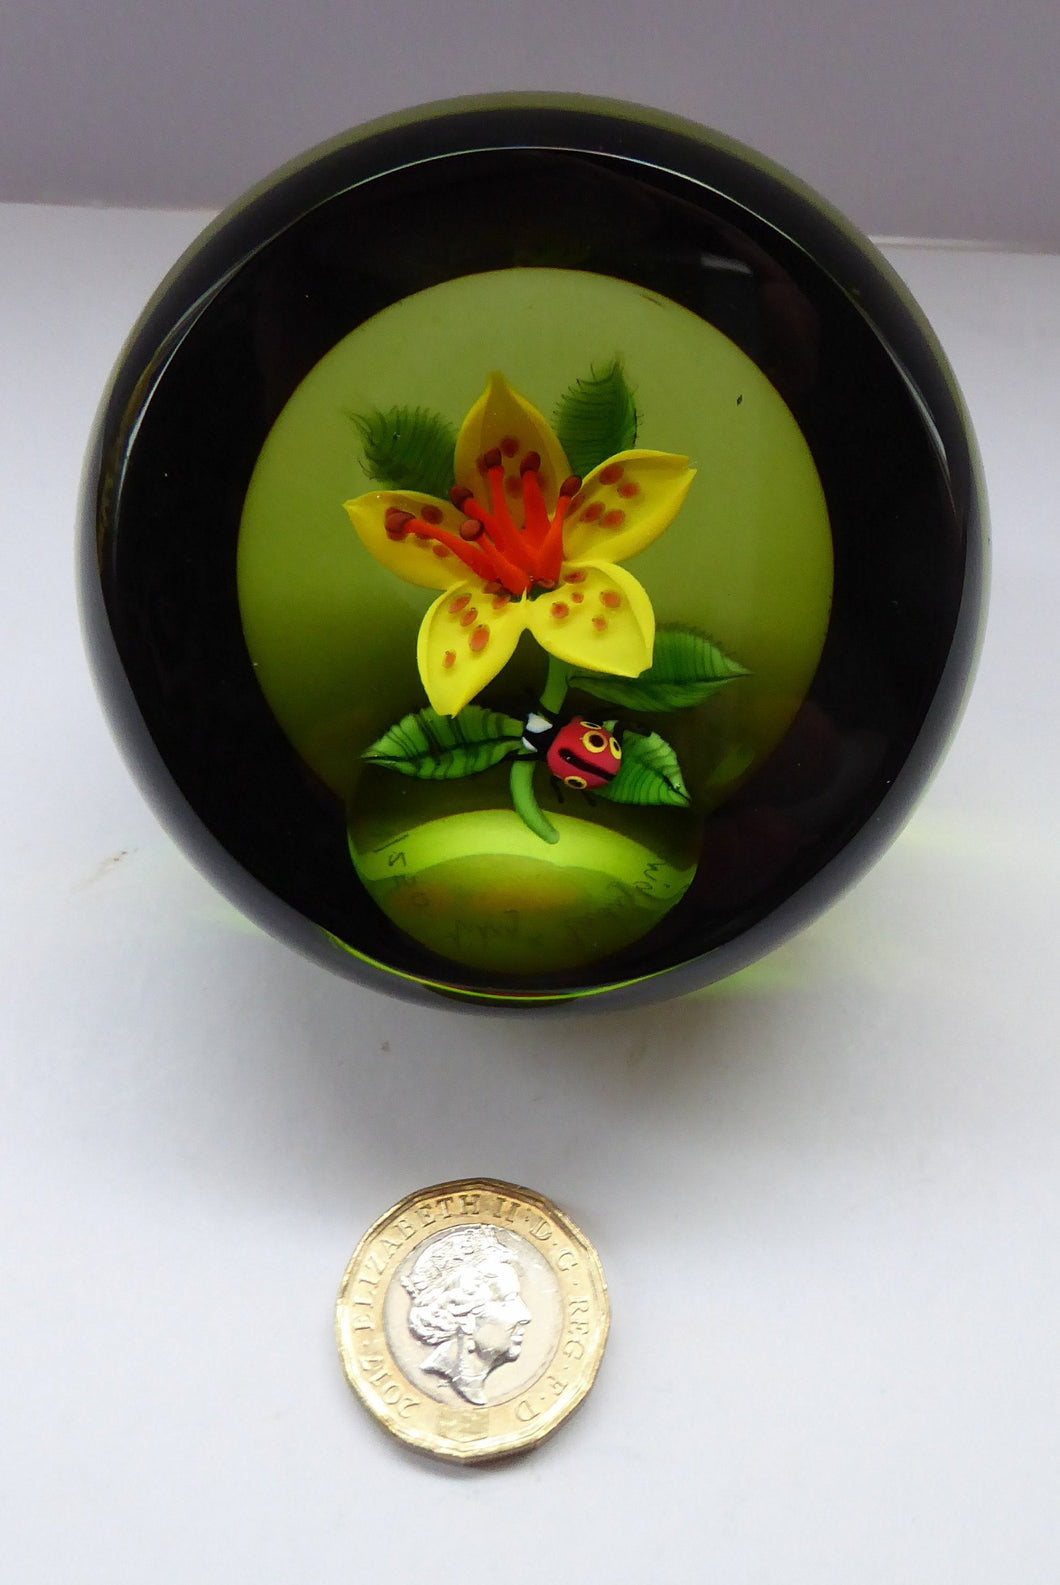 SCOTTISH Large 1991 Limited Edition Caithness LILIES and LADYBIRD Paperweight by William Manson. Signed to the base